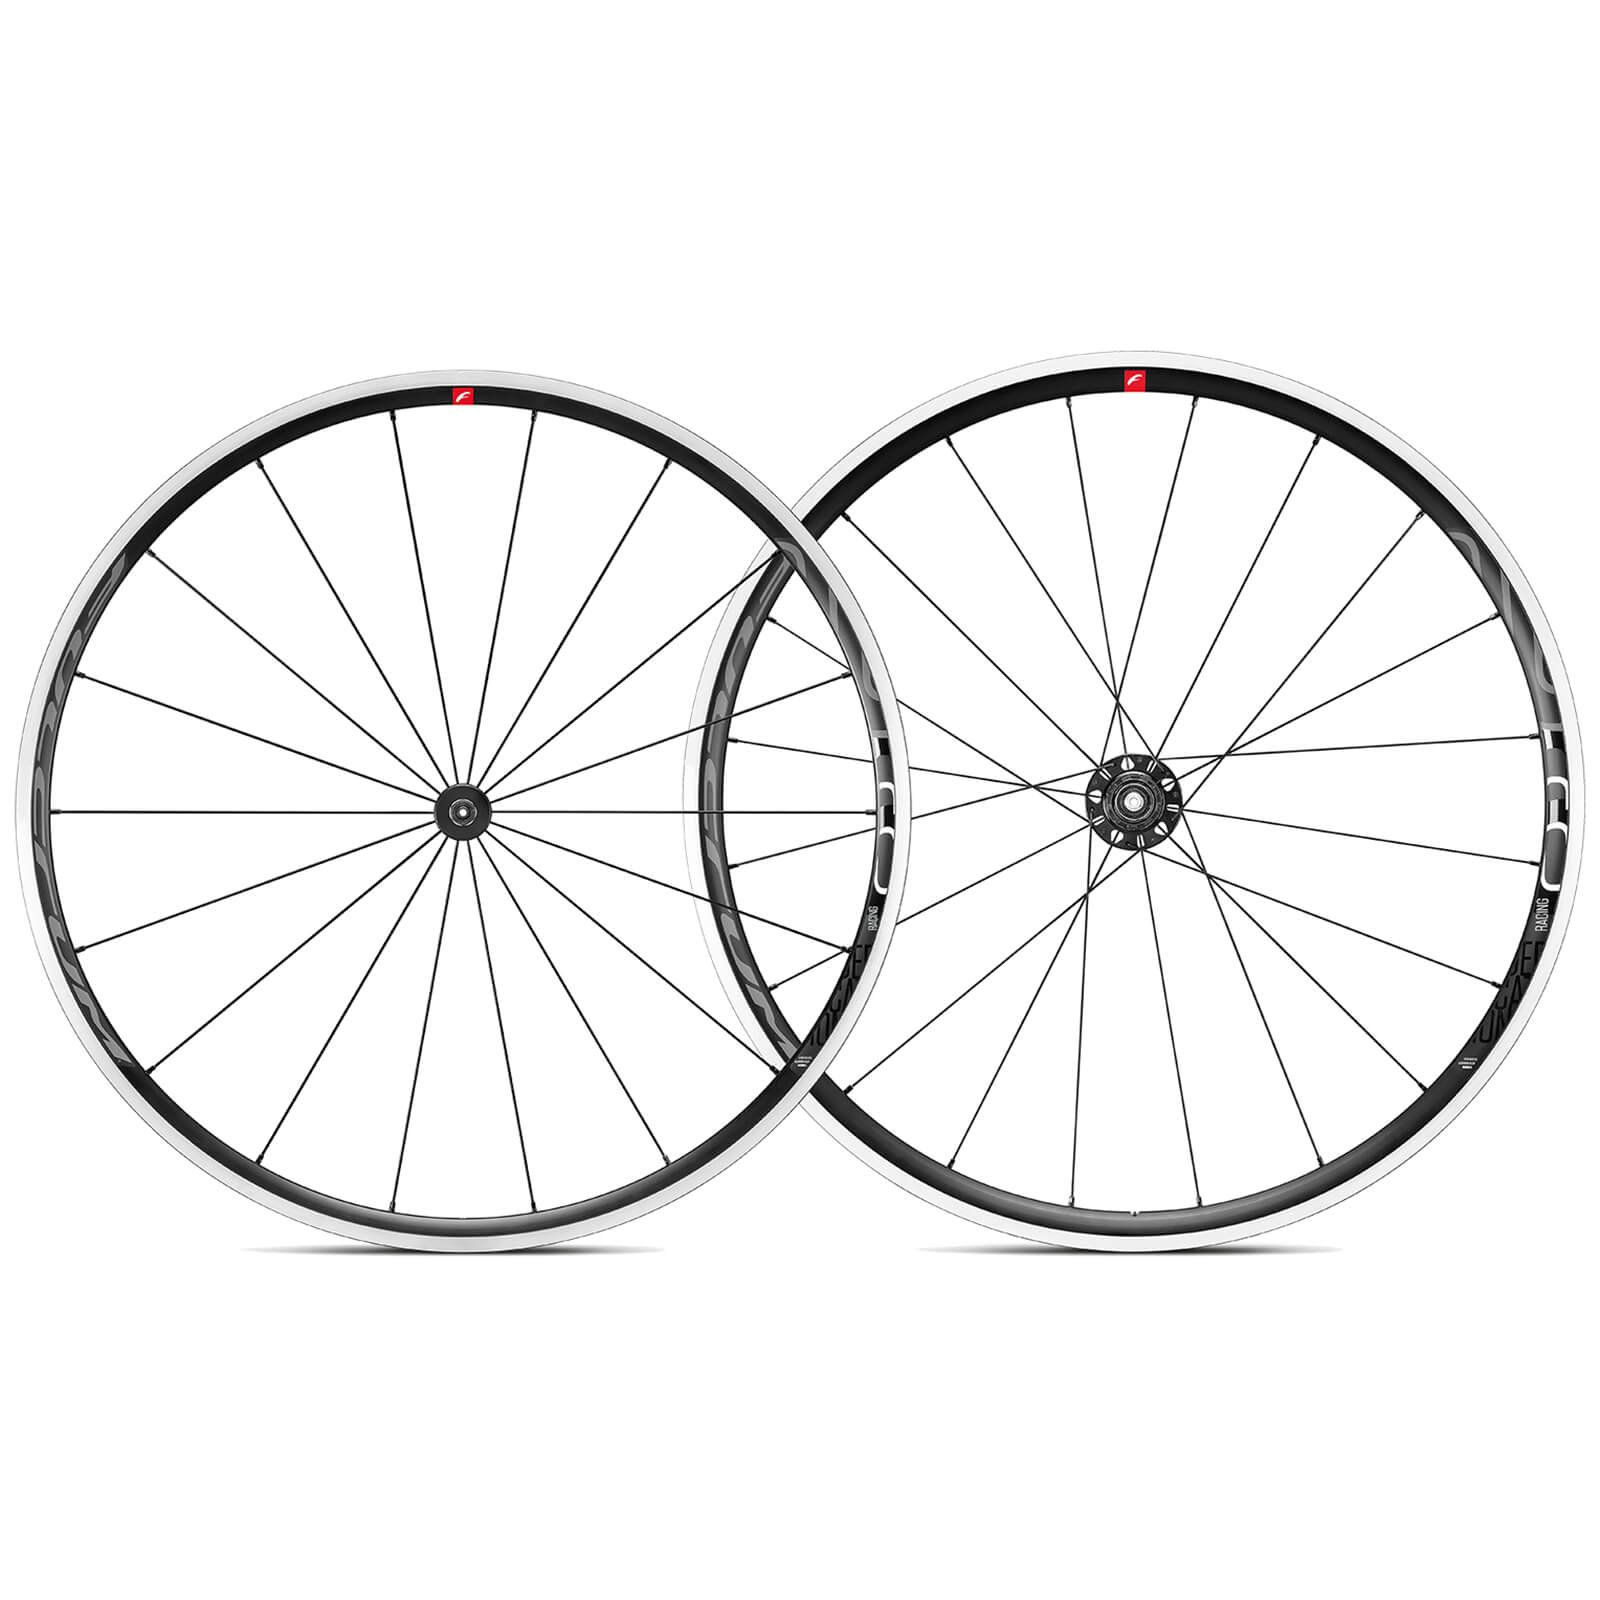 Fulcrum Racing 6 C17 Clincher Wheelset - Campagnolo